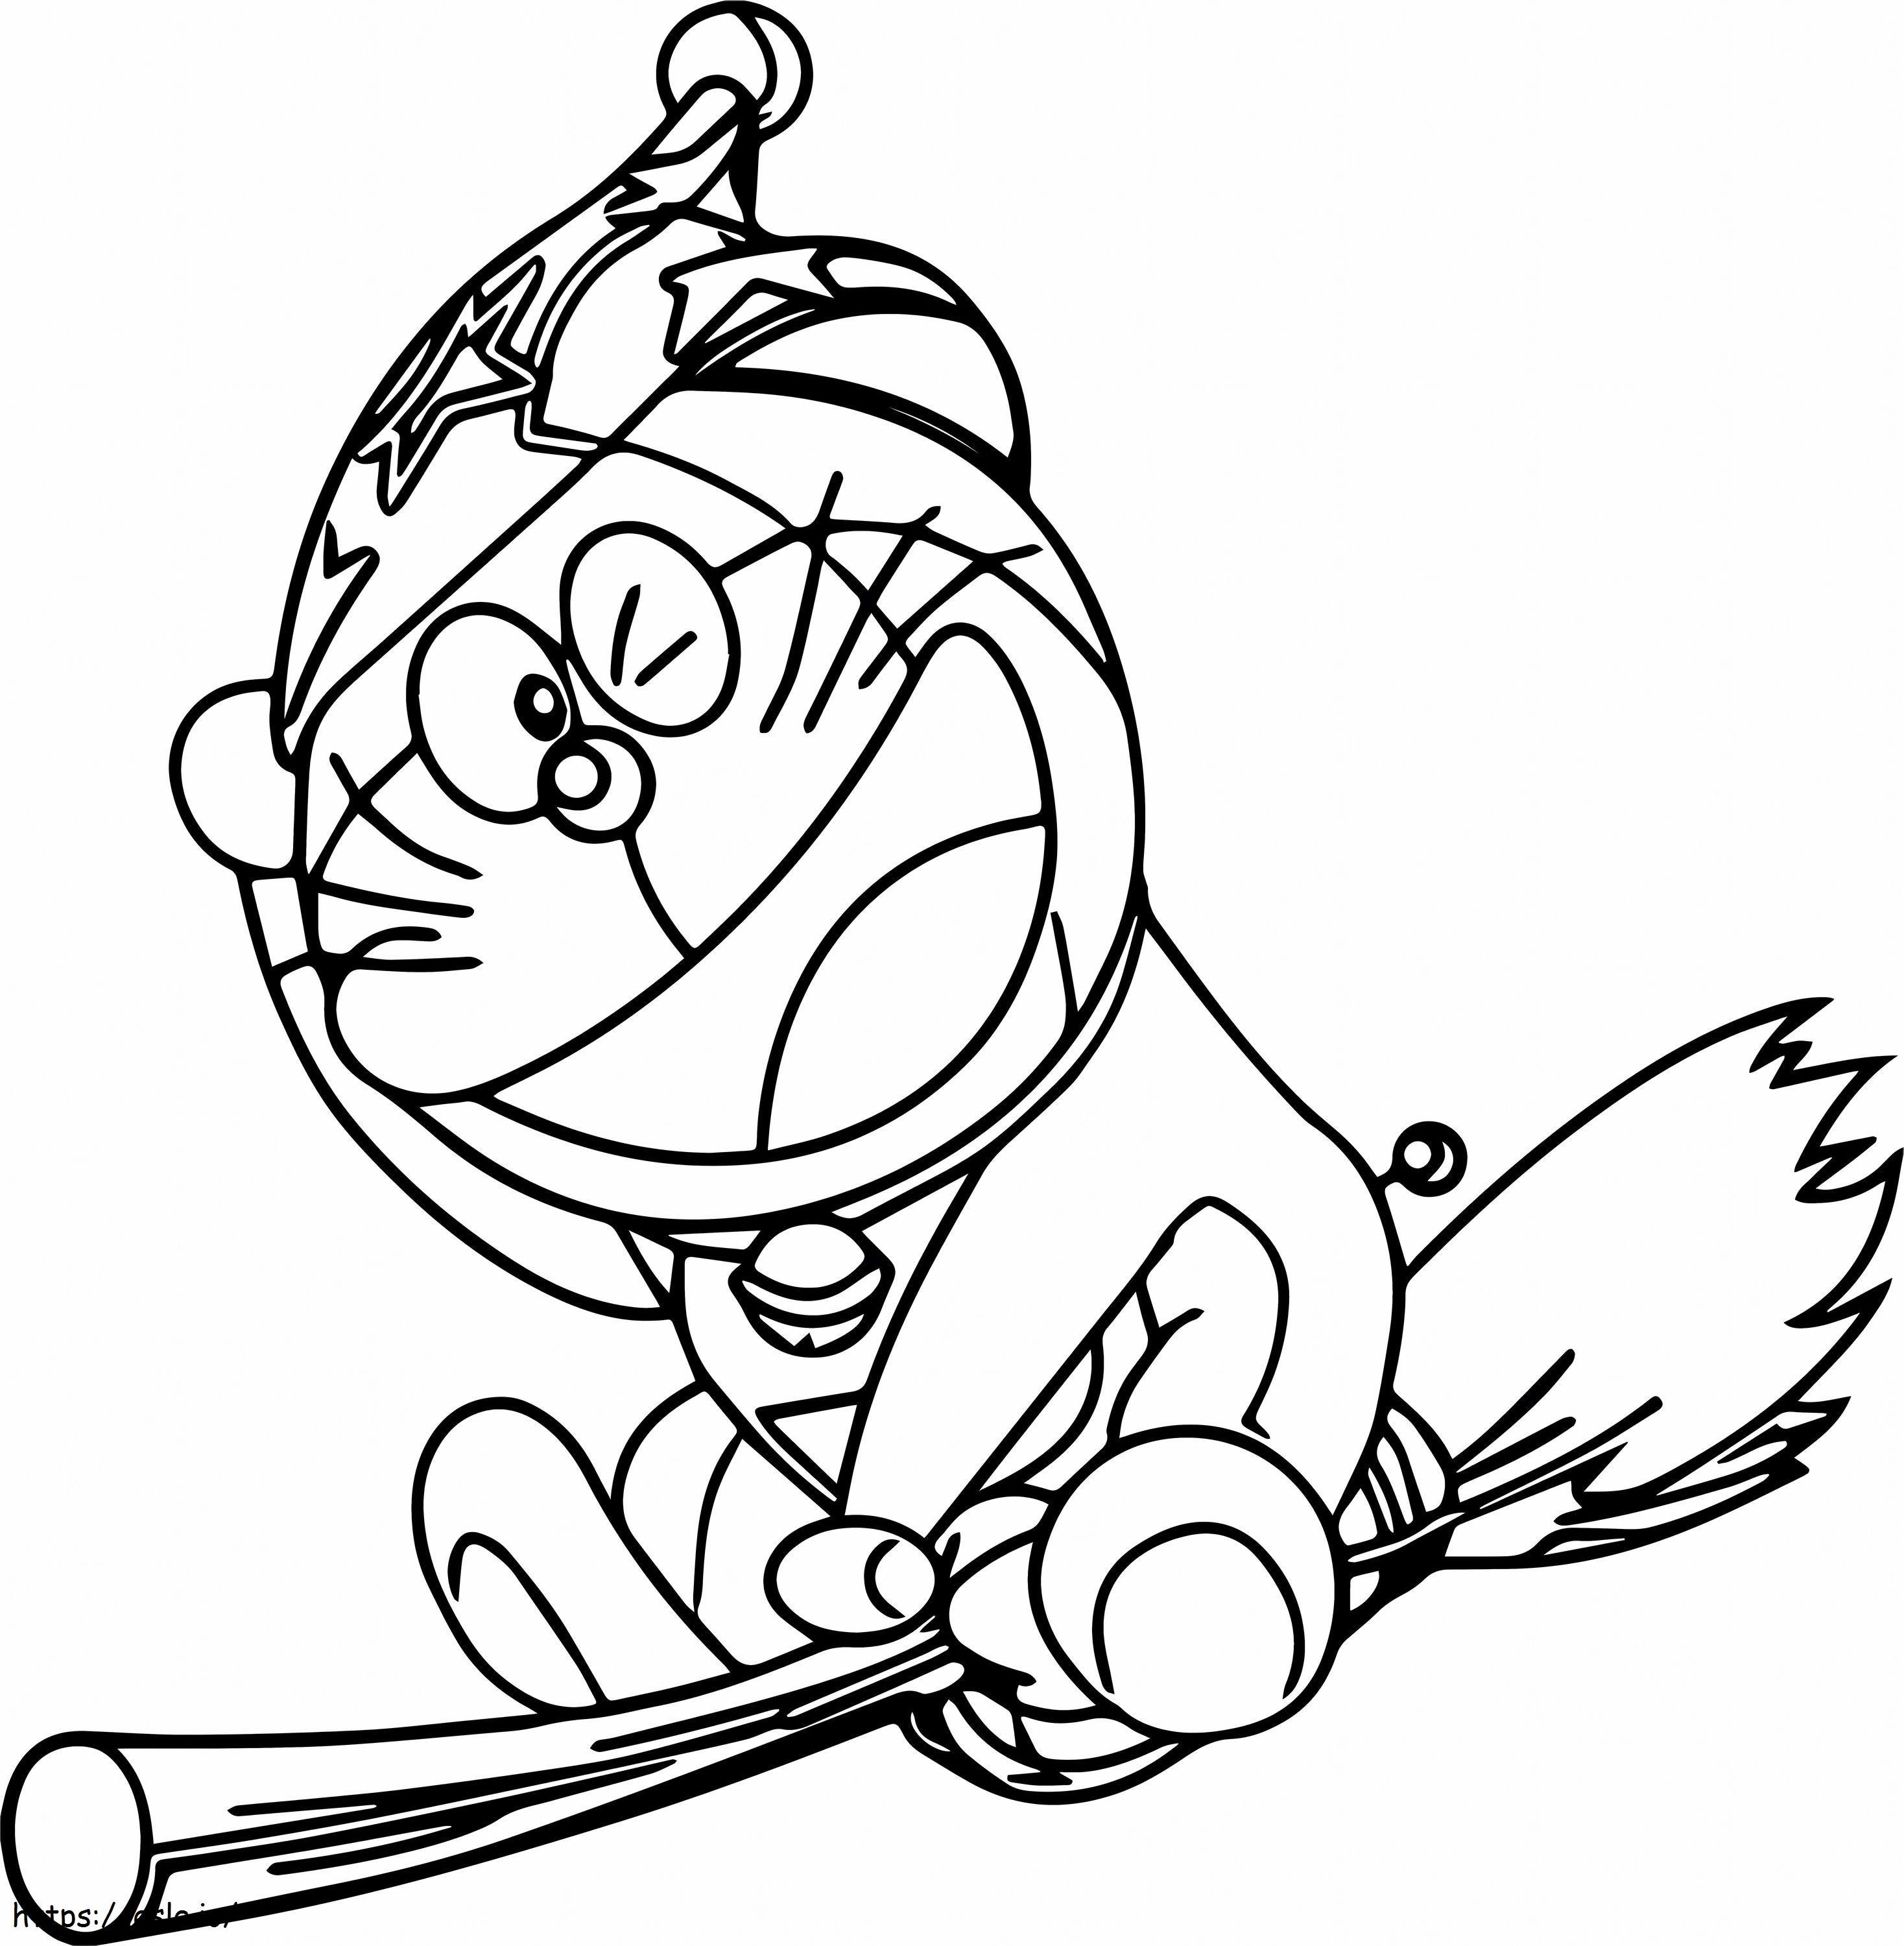 1531277765 Doraemon Flying A4 coloring page